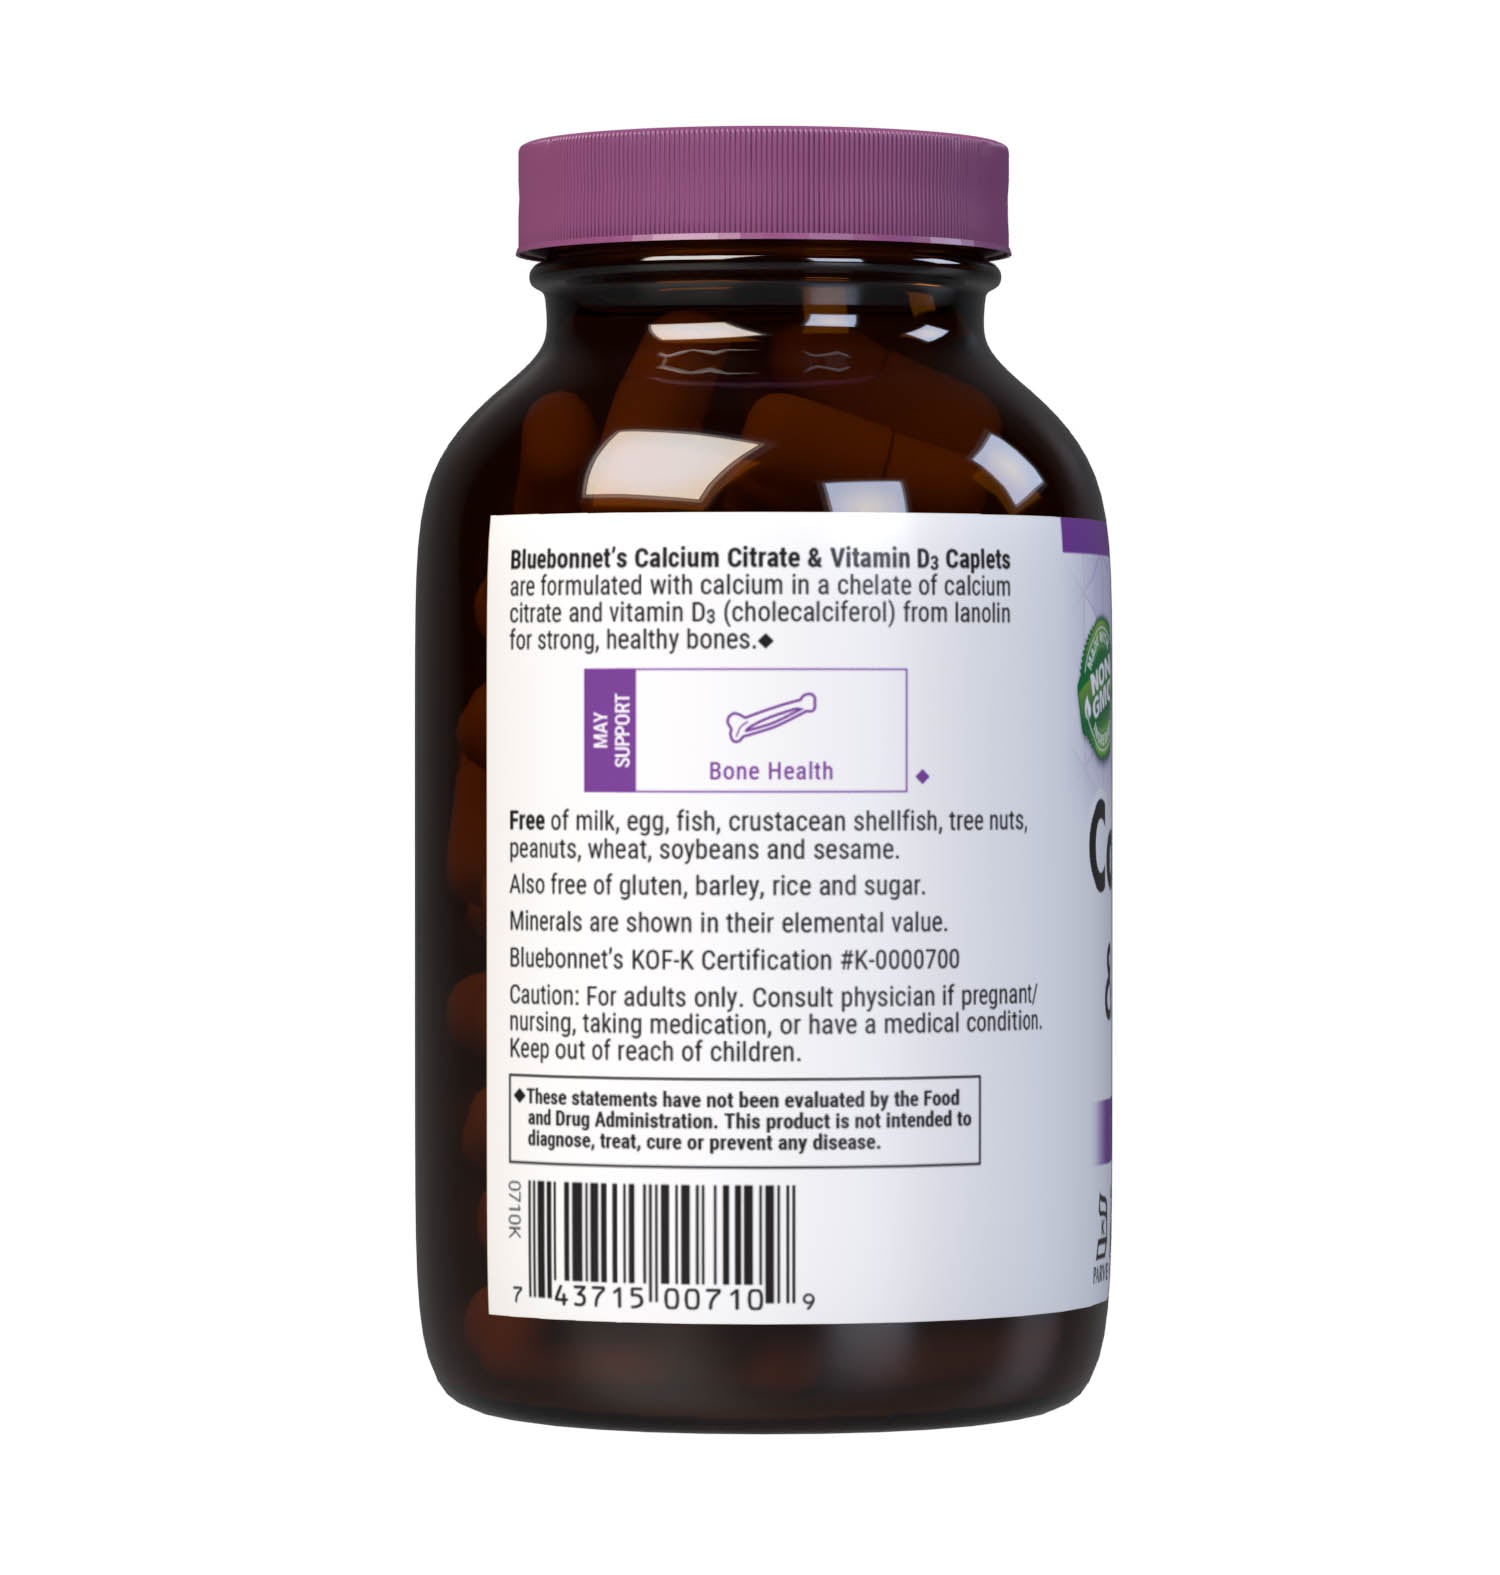 Bluebonnet's Calcium Citrate and Vitamin D3 90 Caplets are formulated with calcium in a chelate of calcium citrate and vitamin D3 (cholecalciferol) from lanolin for strong, healthy bones. Description panel. #size_90 count